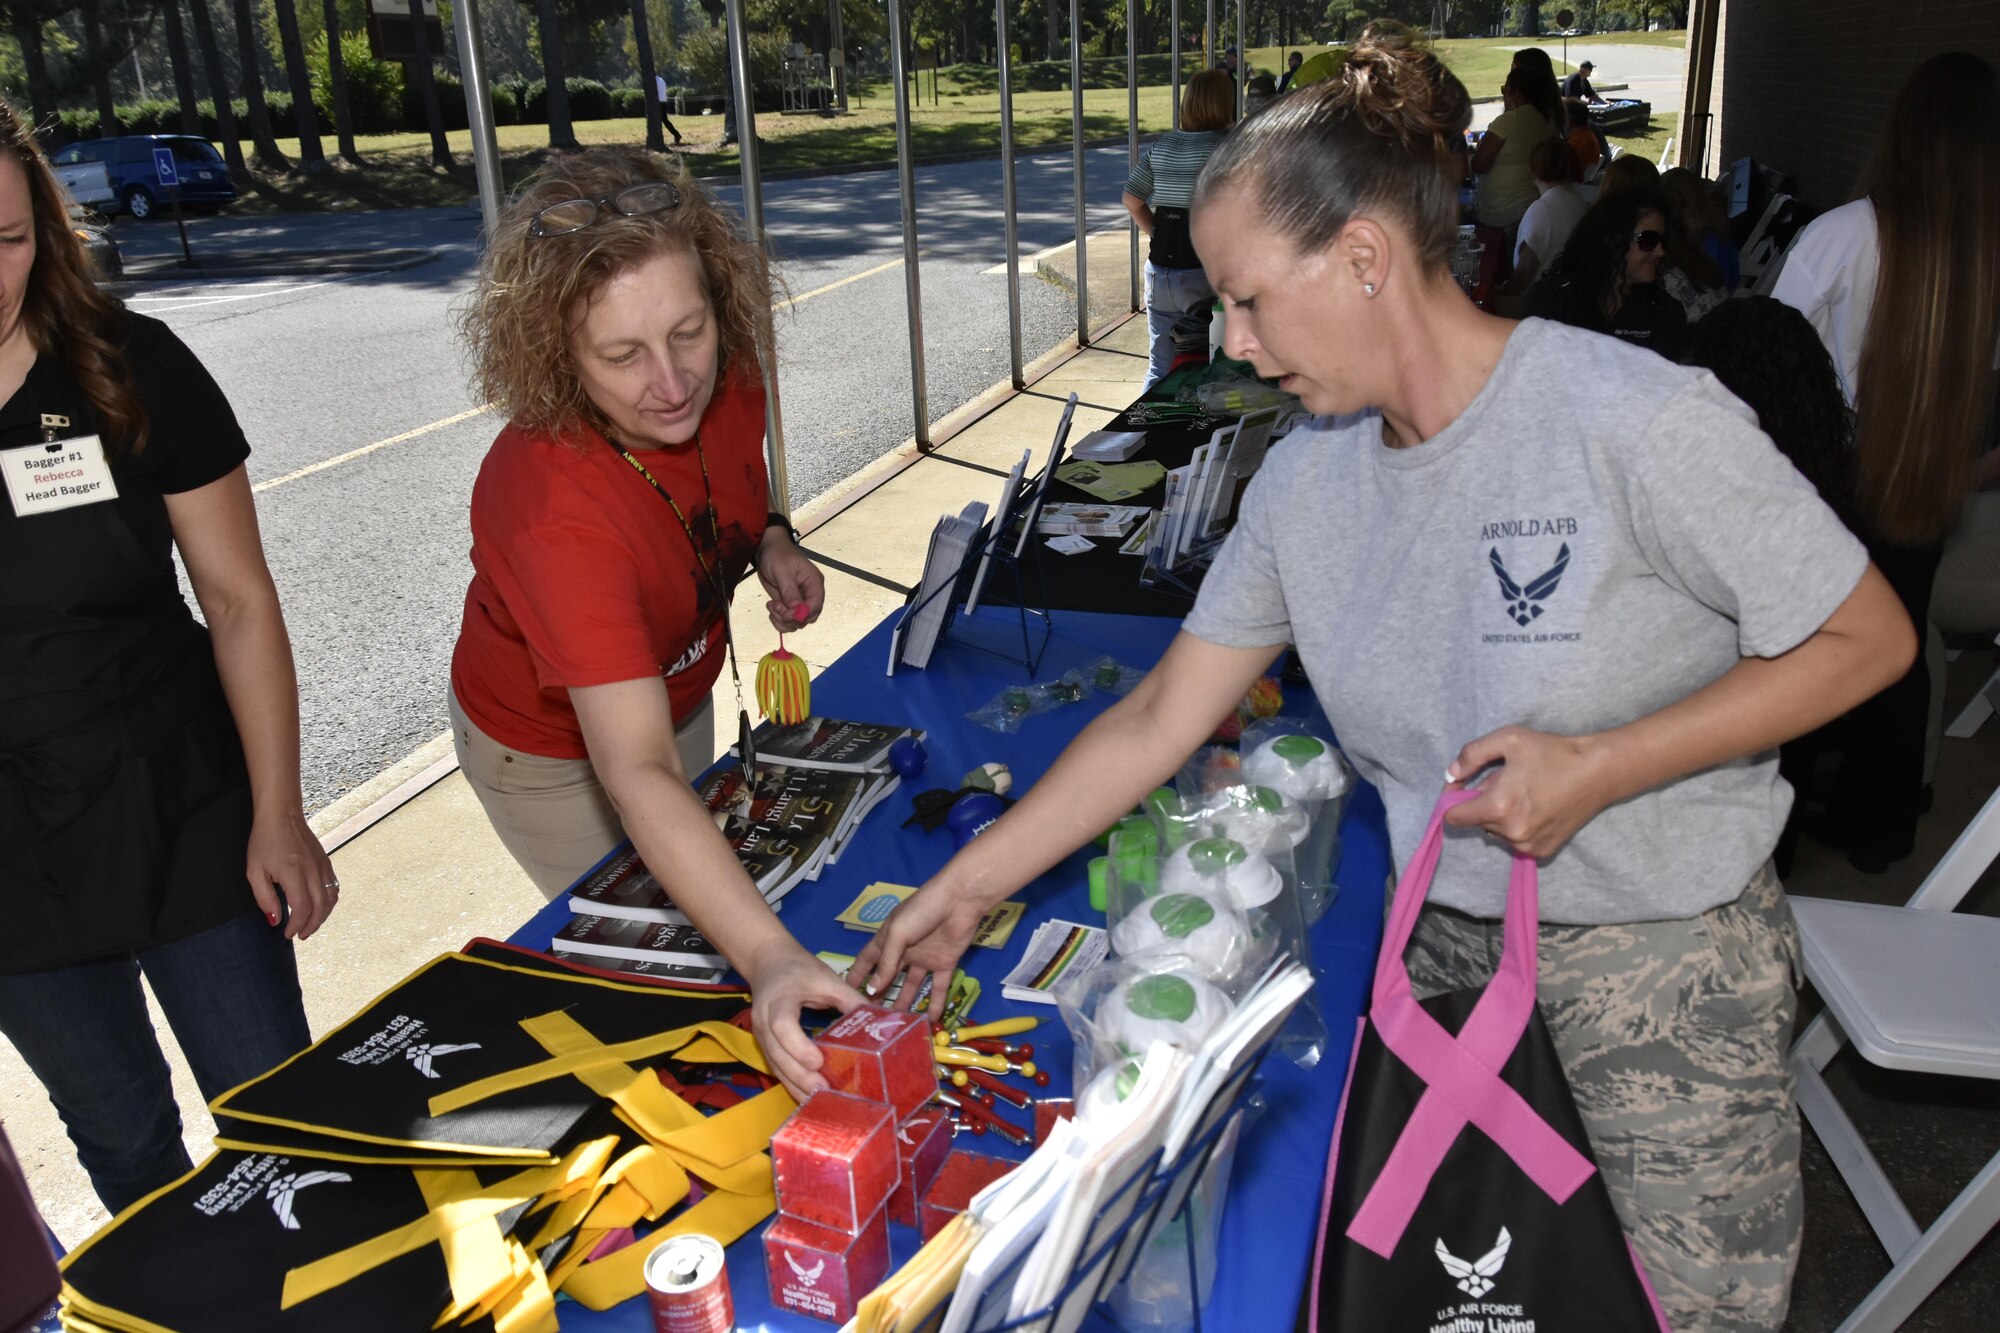 Tech. Sgt. Beverly Spademan (right), a non-commissioned officer in charge of Medical Administration at Arnold Air Force Base, discusses services offered at the Medical Aid Station with an employee during the Arnold Air Force Base Community Health Fair Sept. 29. More than 100 military and civilian visitors attended the health fair. (U.S. Air Force photo/Rick Goodfriend)